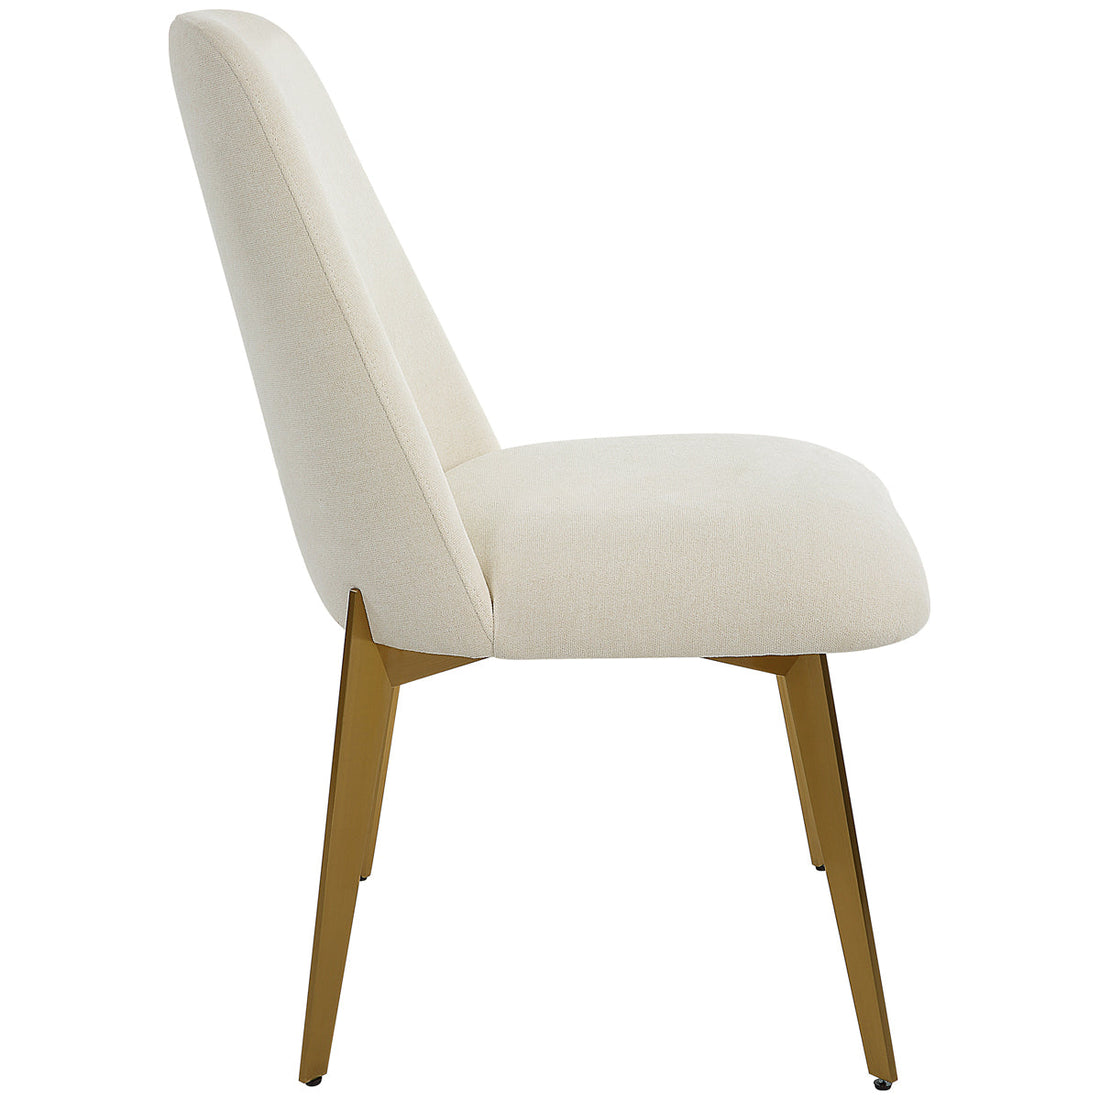 Uttermost Vantage Off-White Fabric Dining Chair